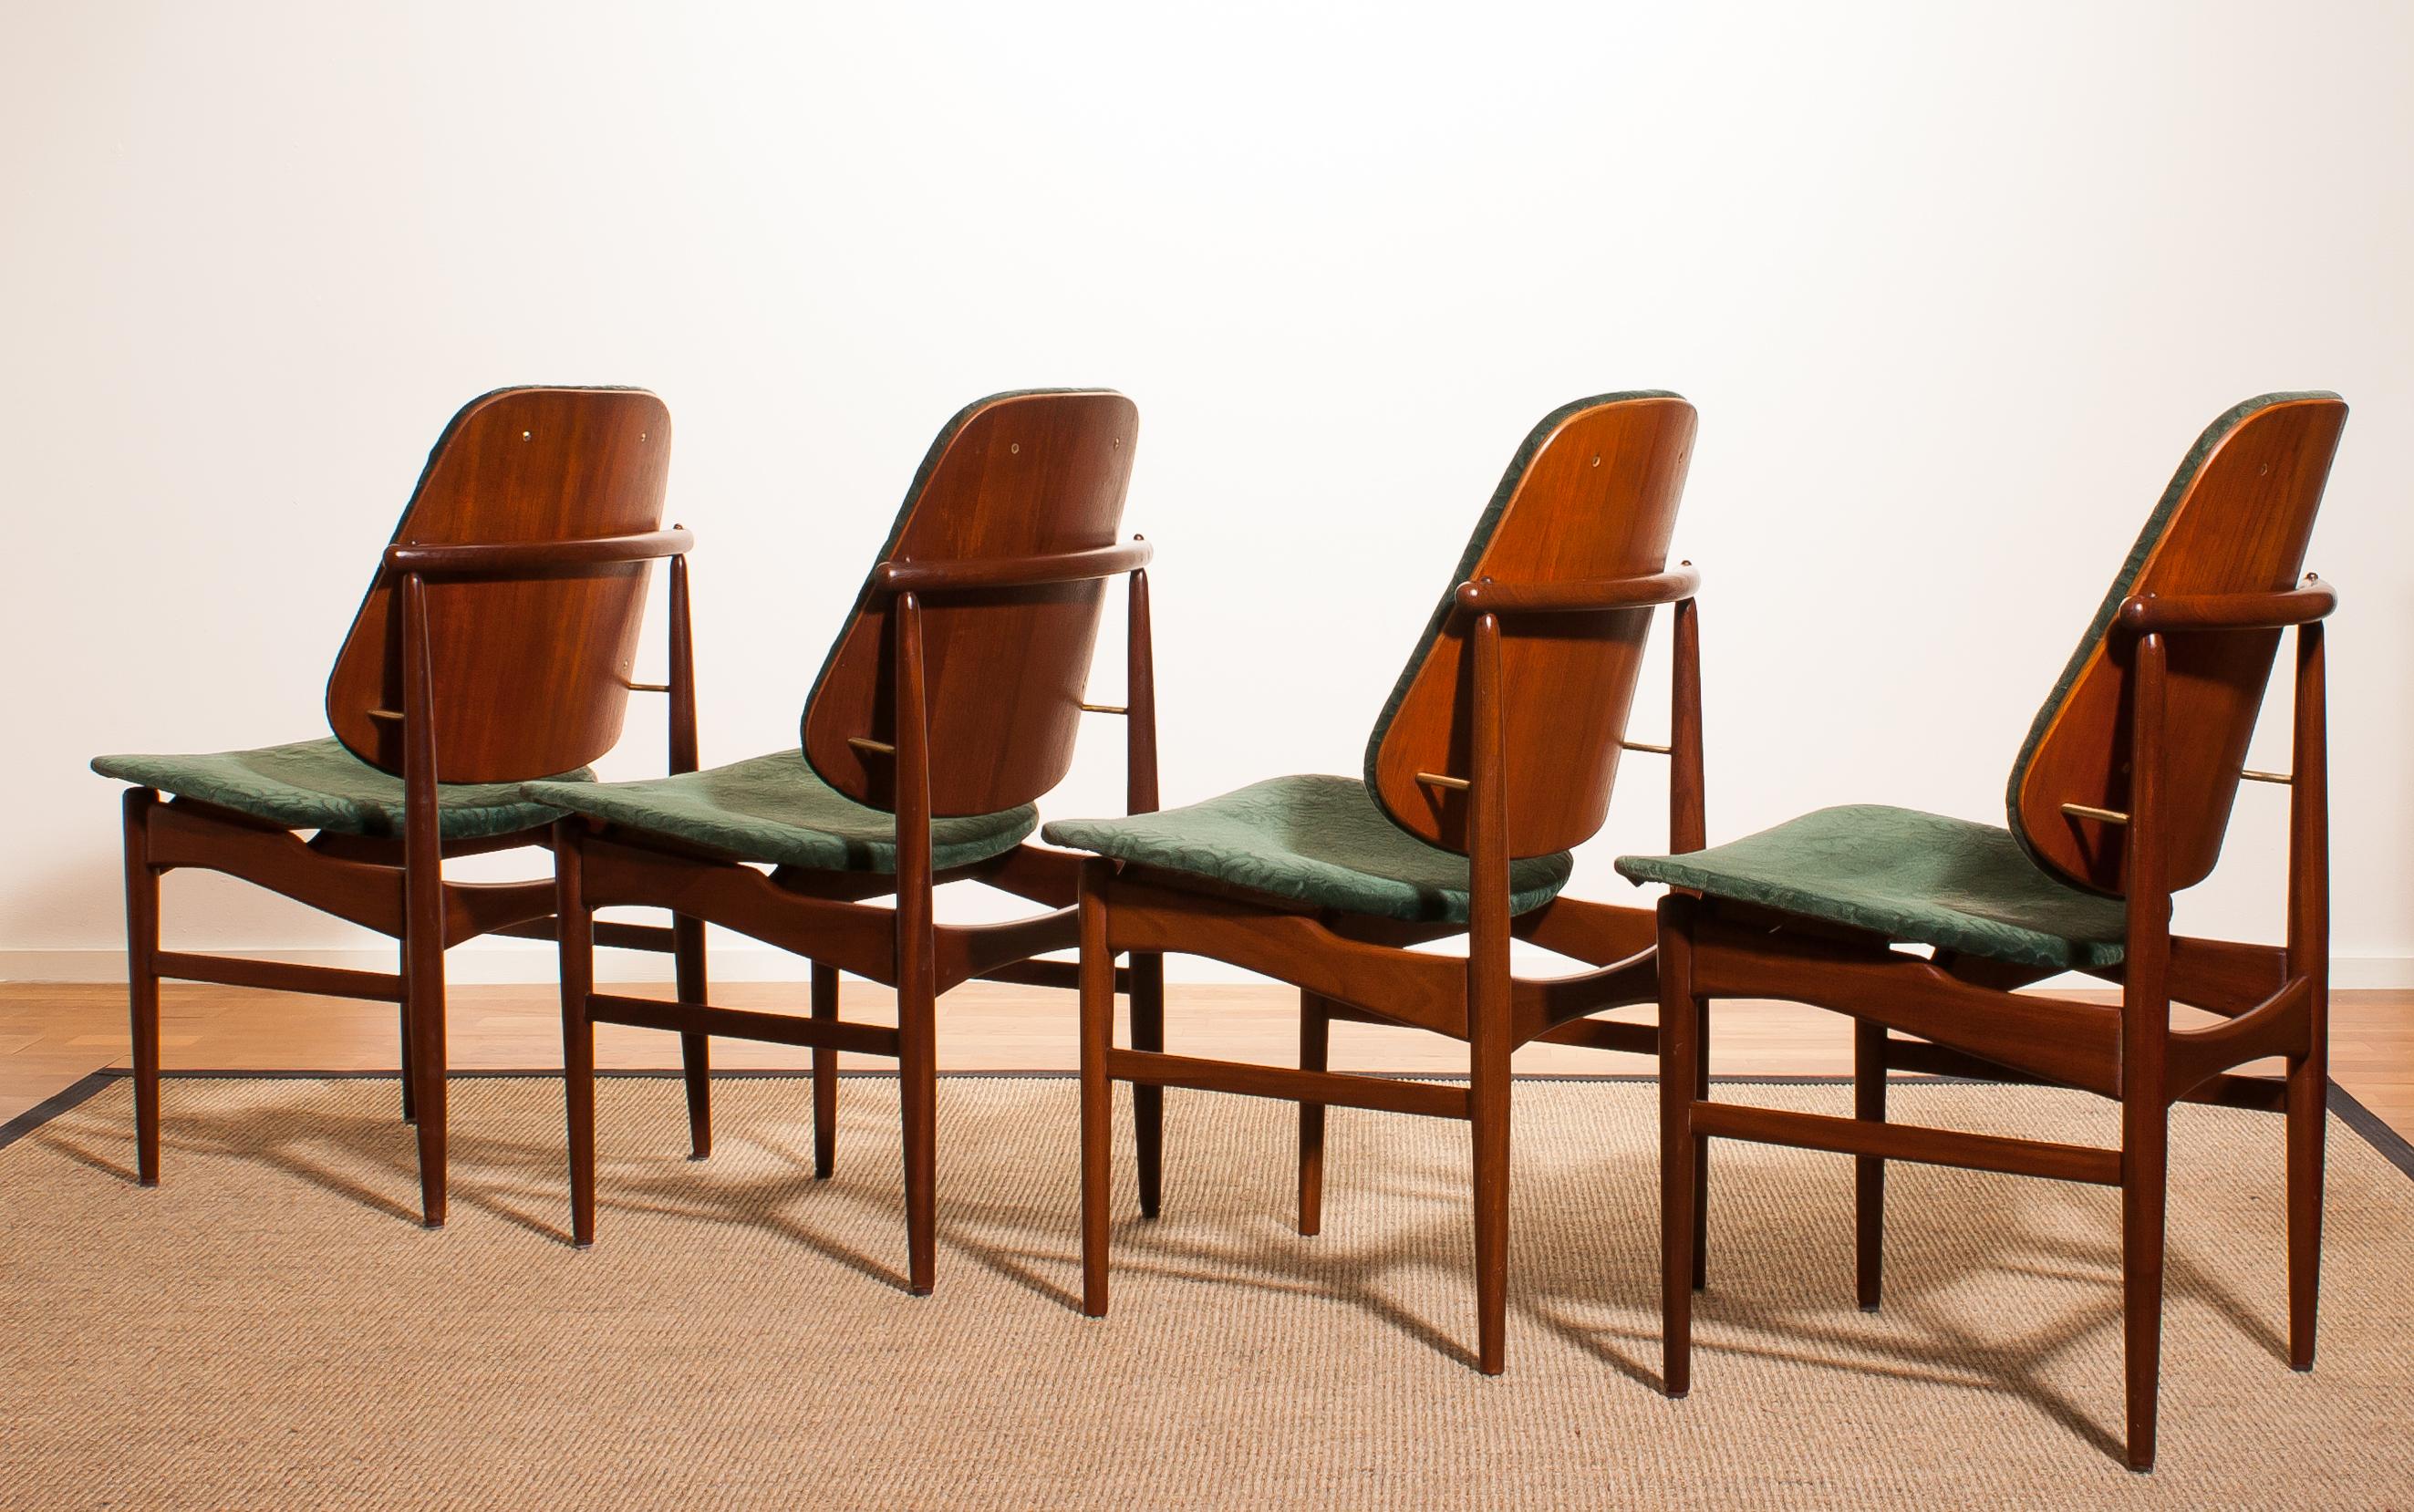 Beautiful set of four Arne Vodder design armchairs made by France & Daverkosen, Denmark.
Seat and back covered in original bottle-green velvet fabric.
These chairs sit extremely comfortable and are beautifully finished with beautiful bronze